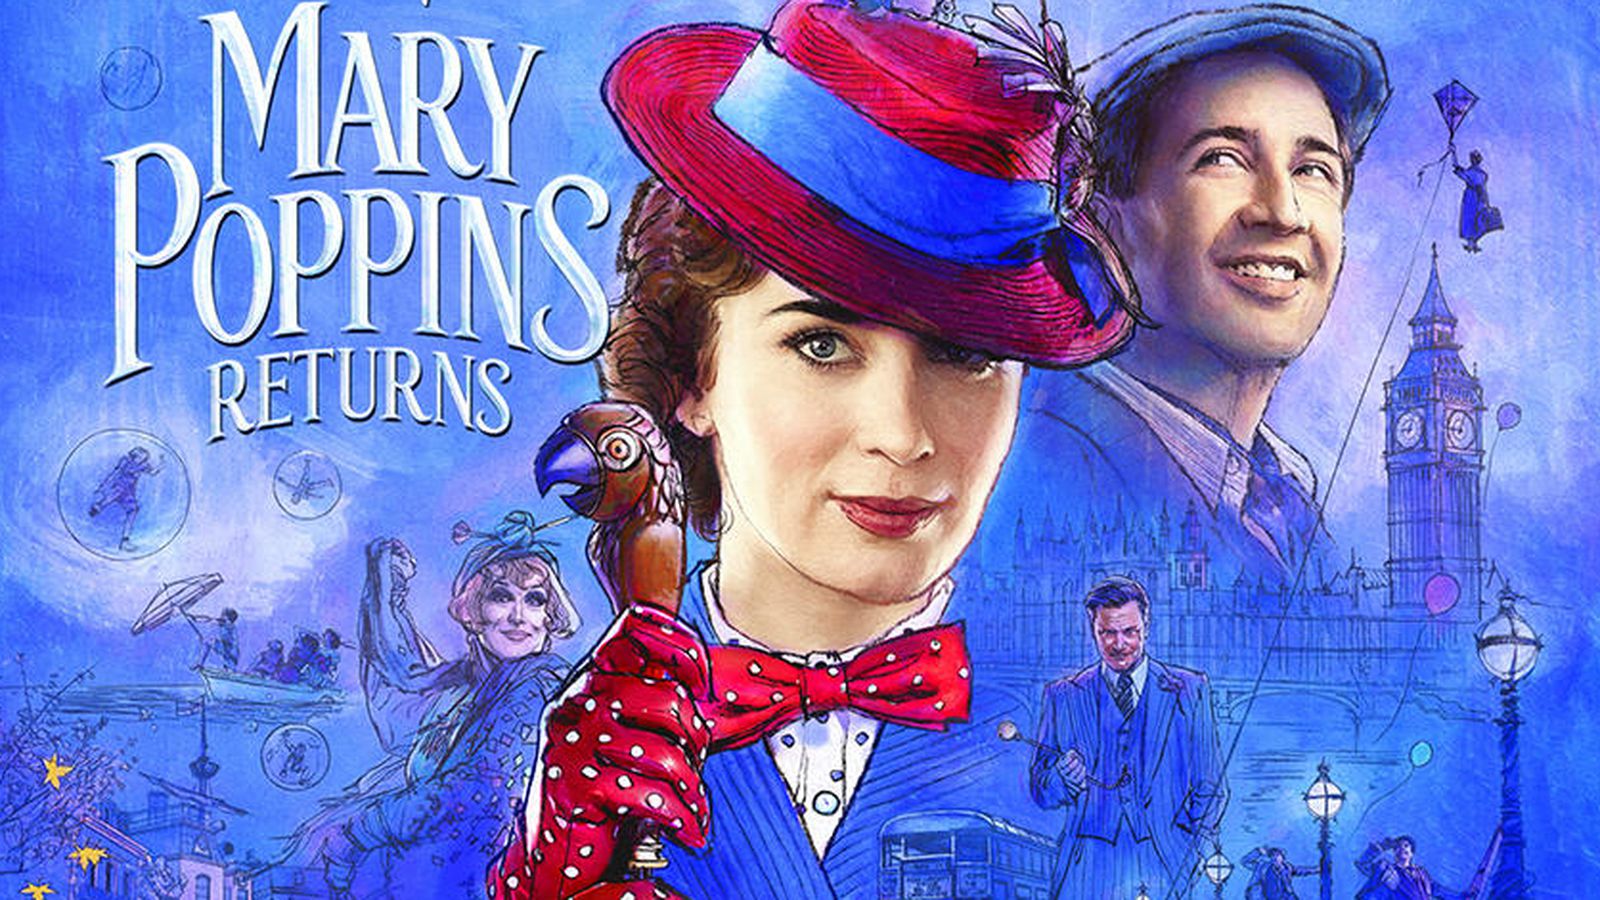 Mary Poppins Returns (2018) English DVDRip 400MB 700MB Download